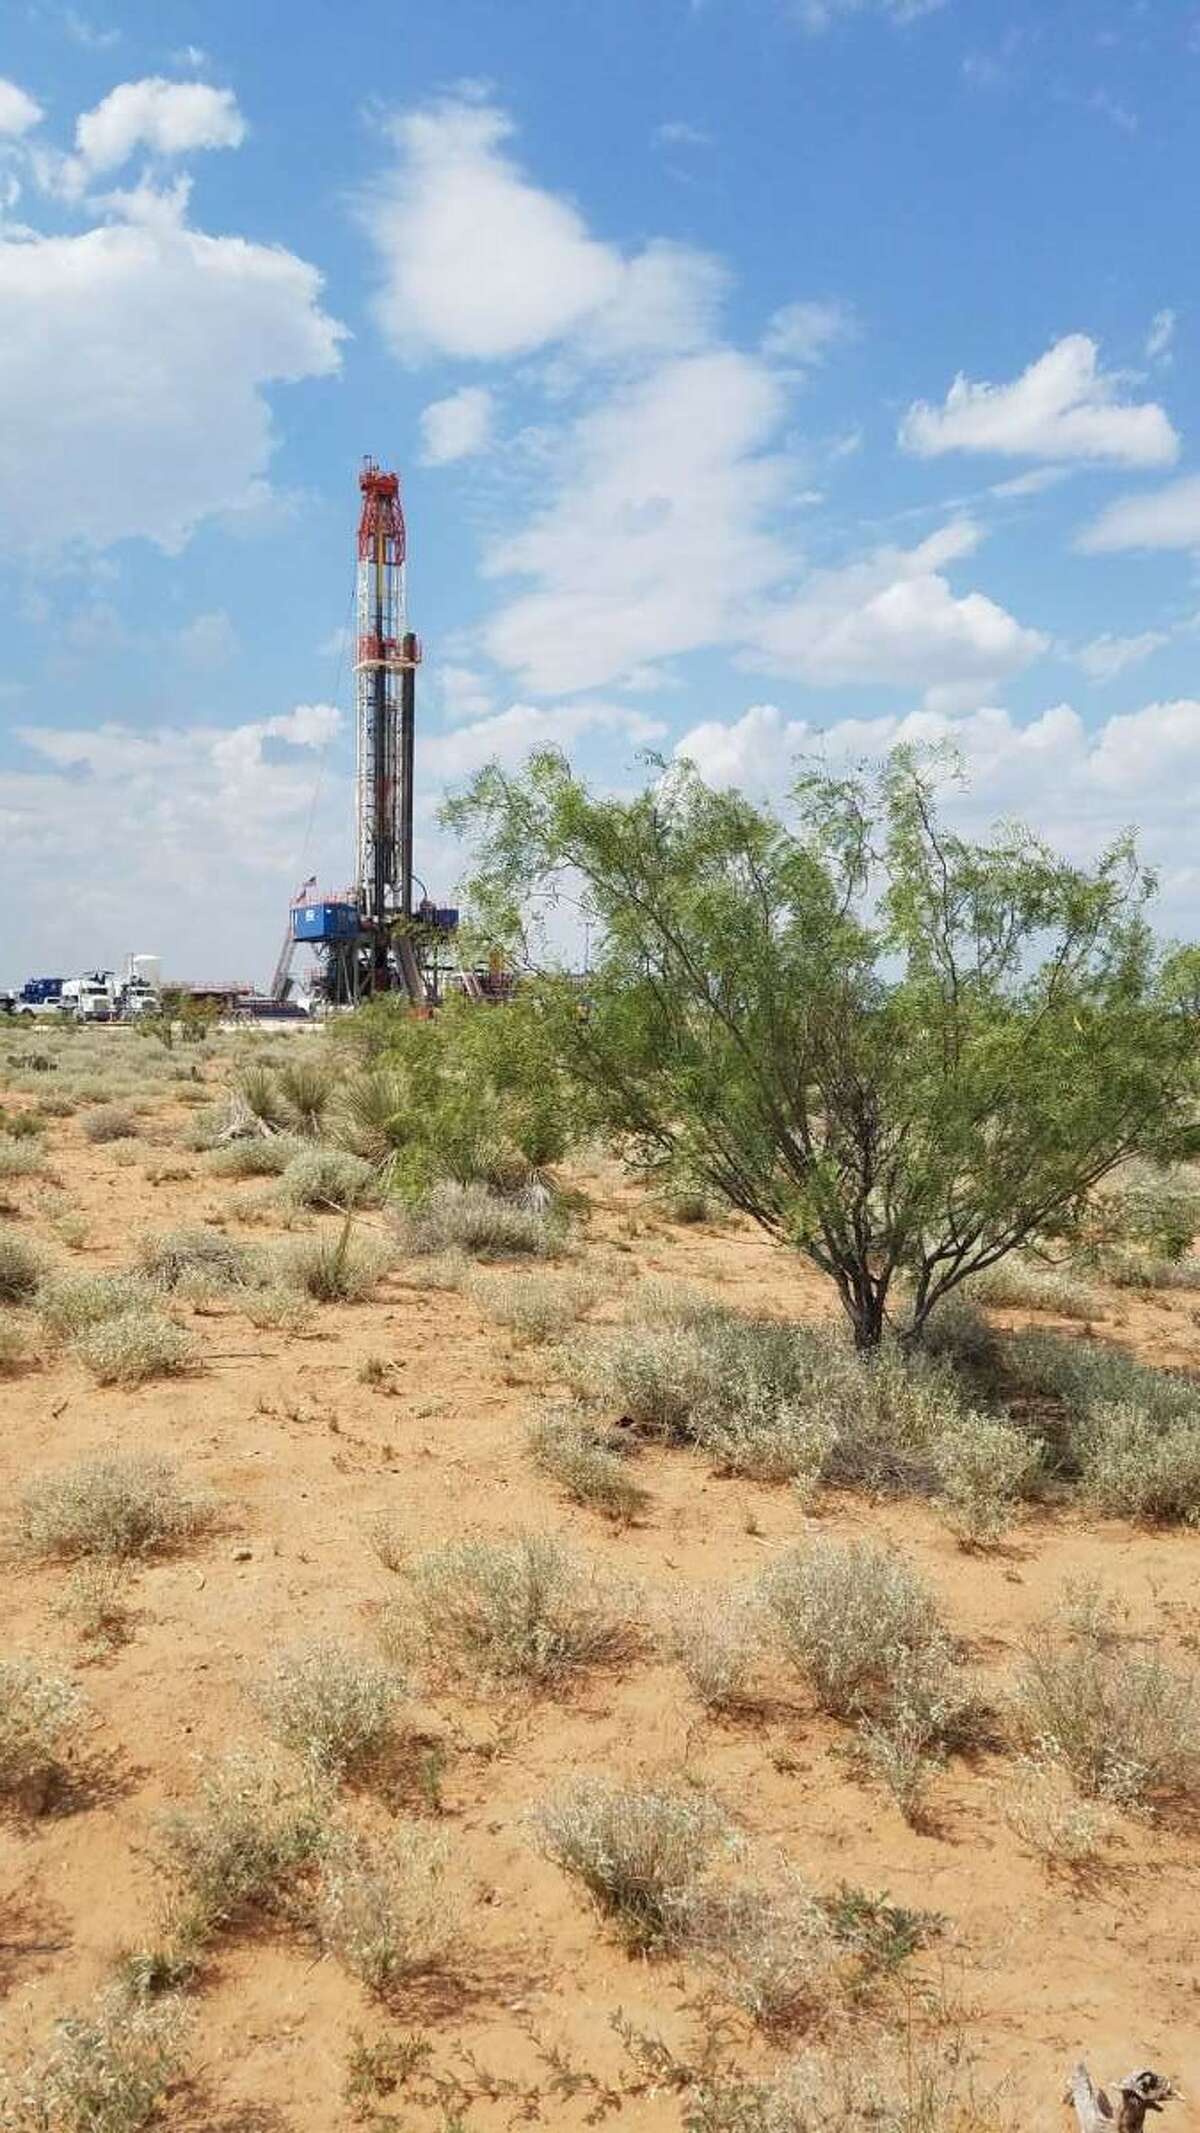 Abraxas recently drilled a pair of Bone Spring horizontal wells on its Mesquite lease in Ward County. The company is completing a restructuring that will transform it into a pure-play Delaware Basin company.